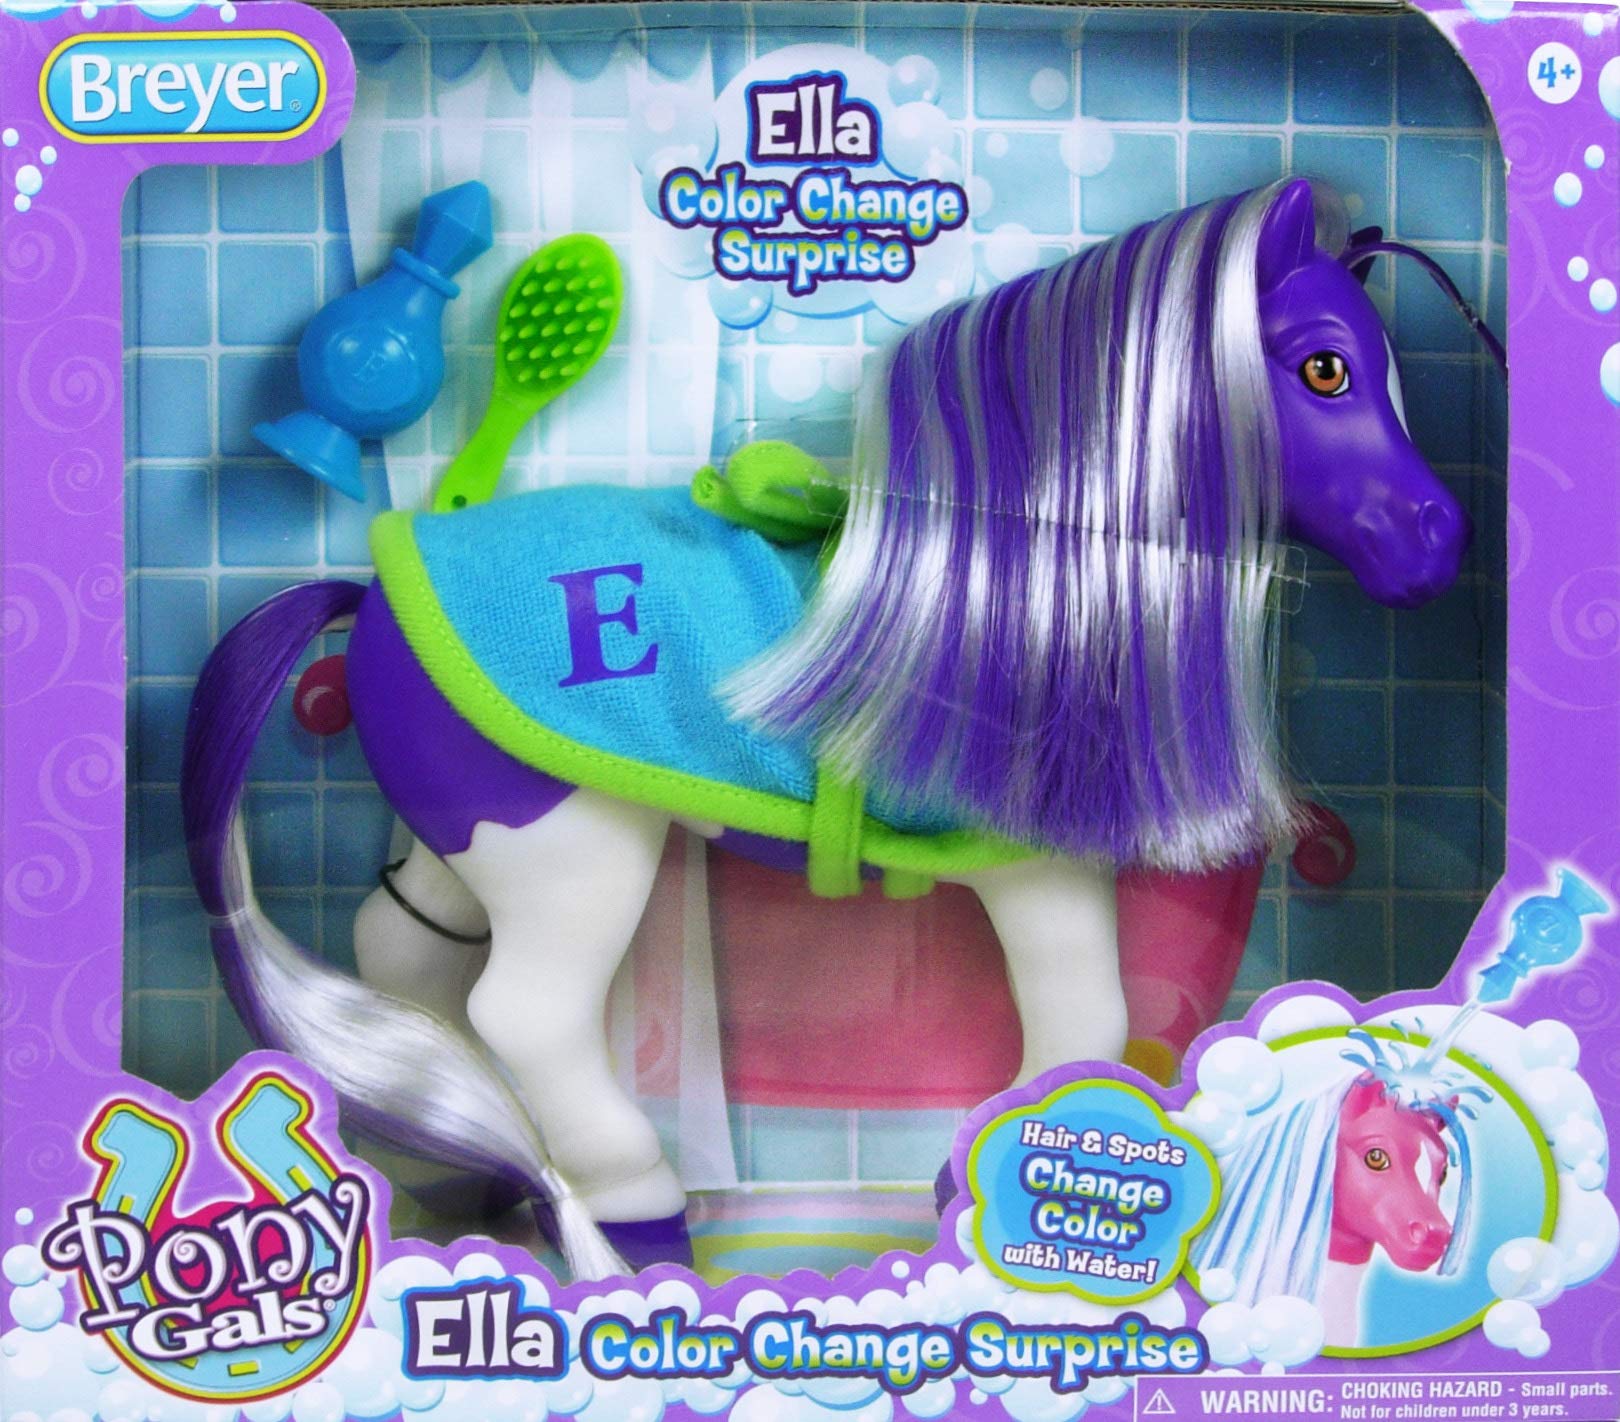 Breyer Color Changing Bath Toy | Ella the Horse | Purple / White with Surprise Pink Color | 7